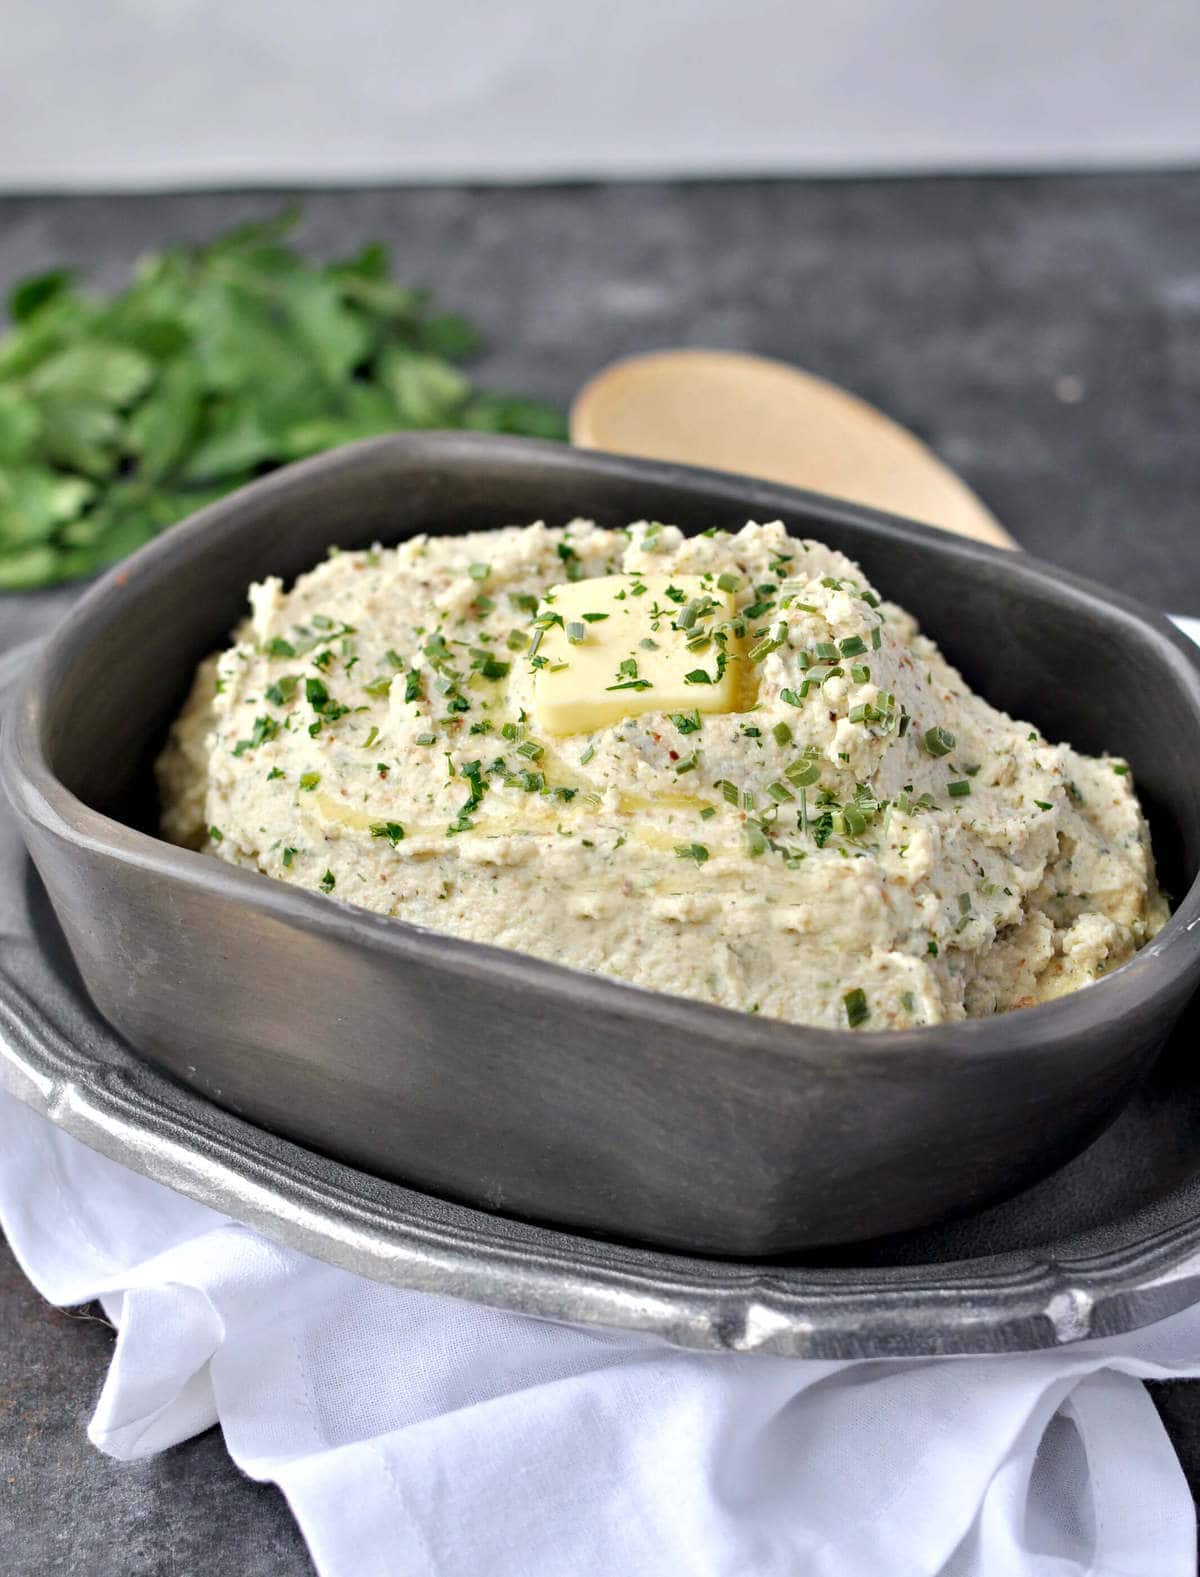 a dish of mashed cauliflower, garnished with butter and parsley, served with a wood spoon